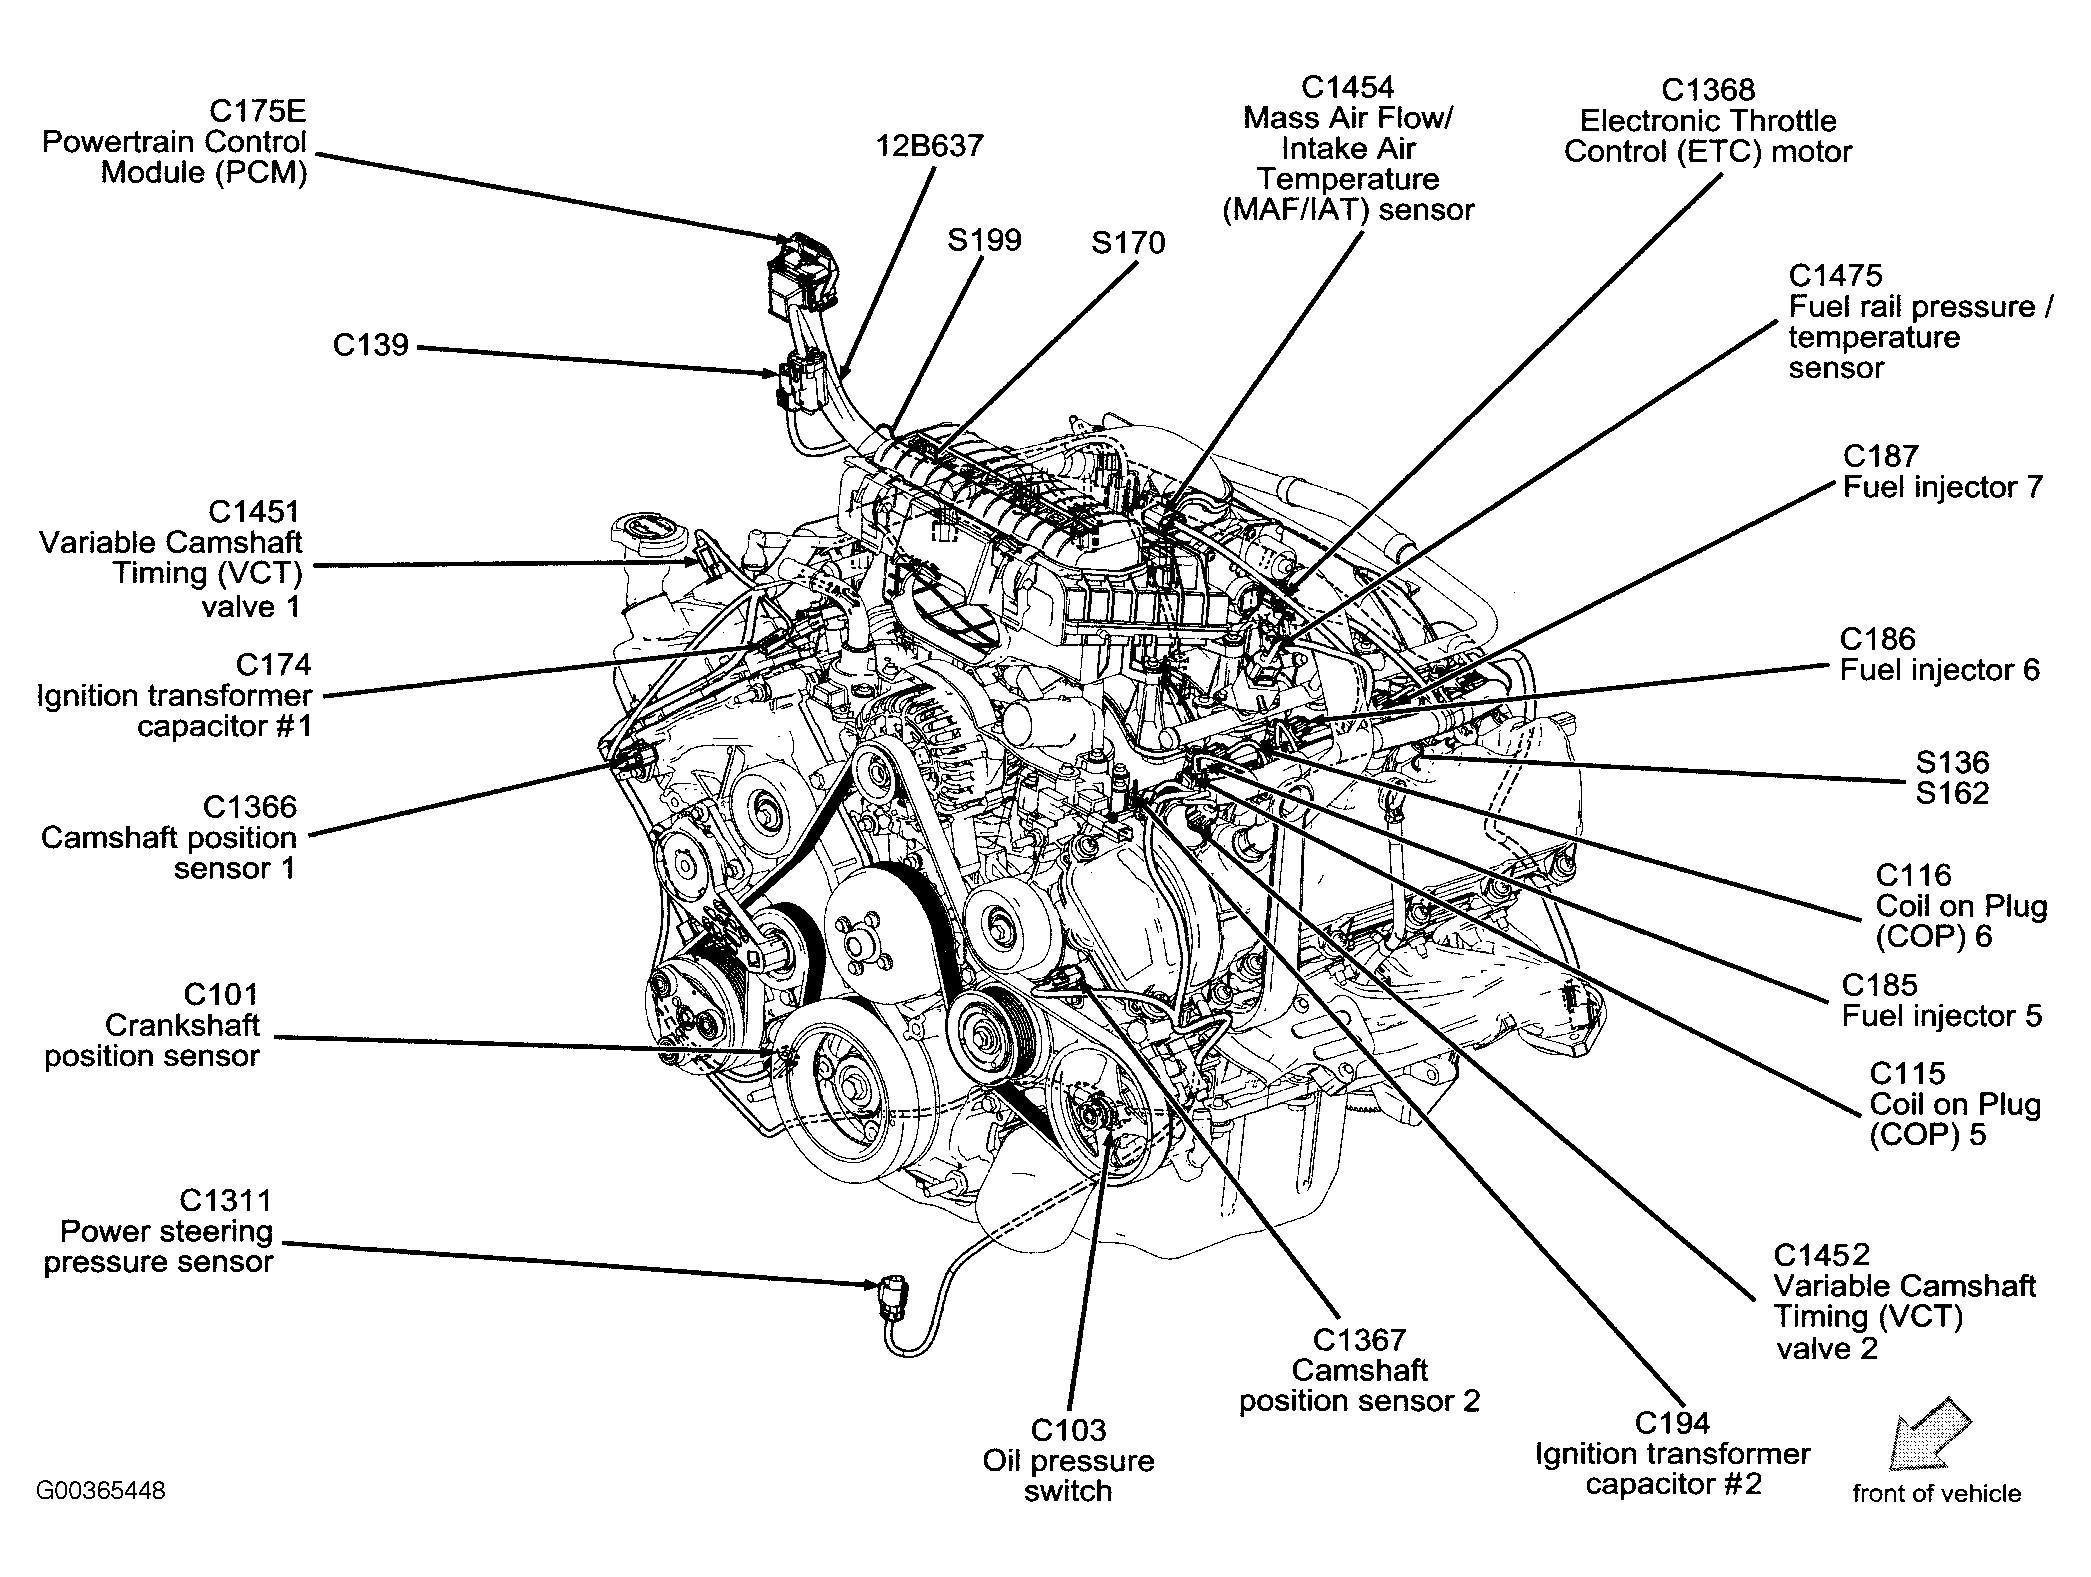 1992 ford F150 Parts Diagram ford F 150 Parts Diagram 07 21 Crank Fine Portrait Heres some Of 1992 ford F150 Parts Diagram